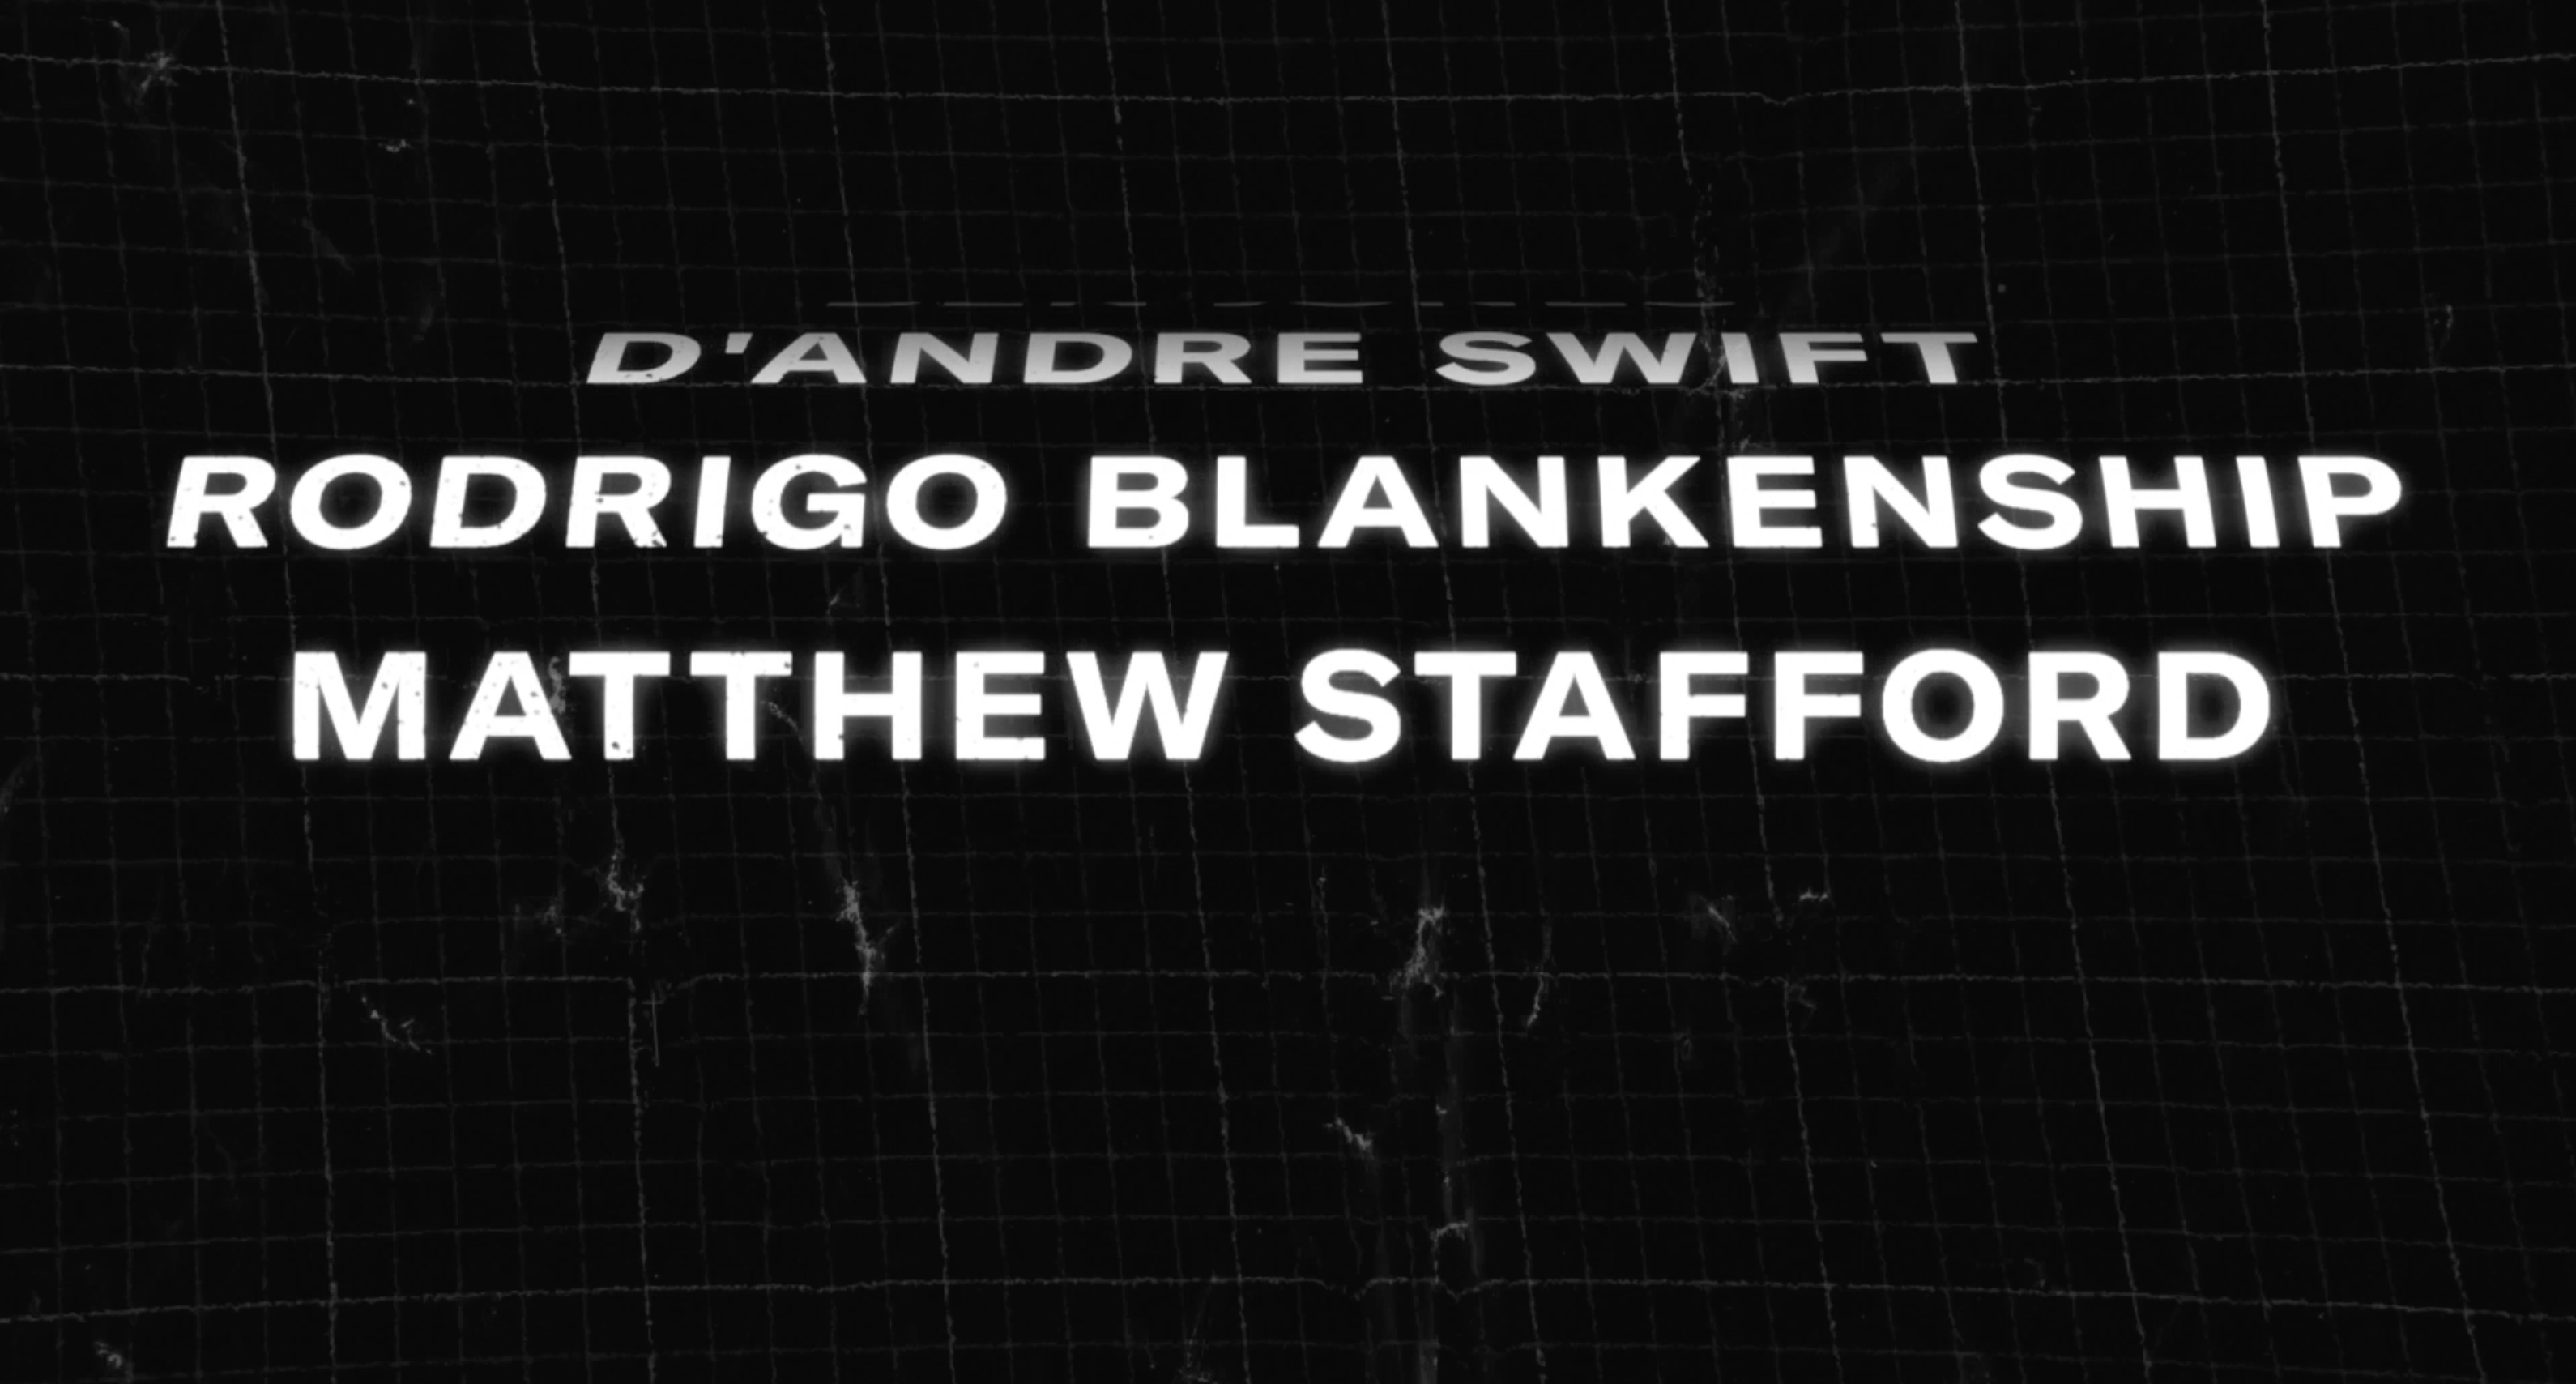 Thumbnail of a list of names in a motion graphics reel